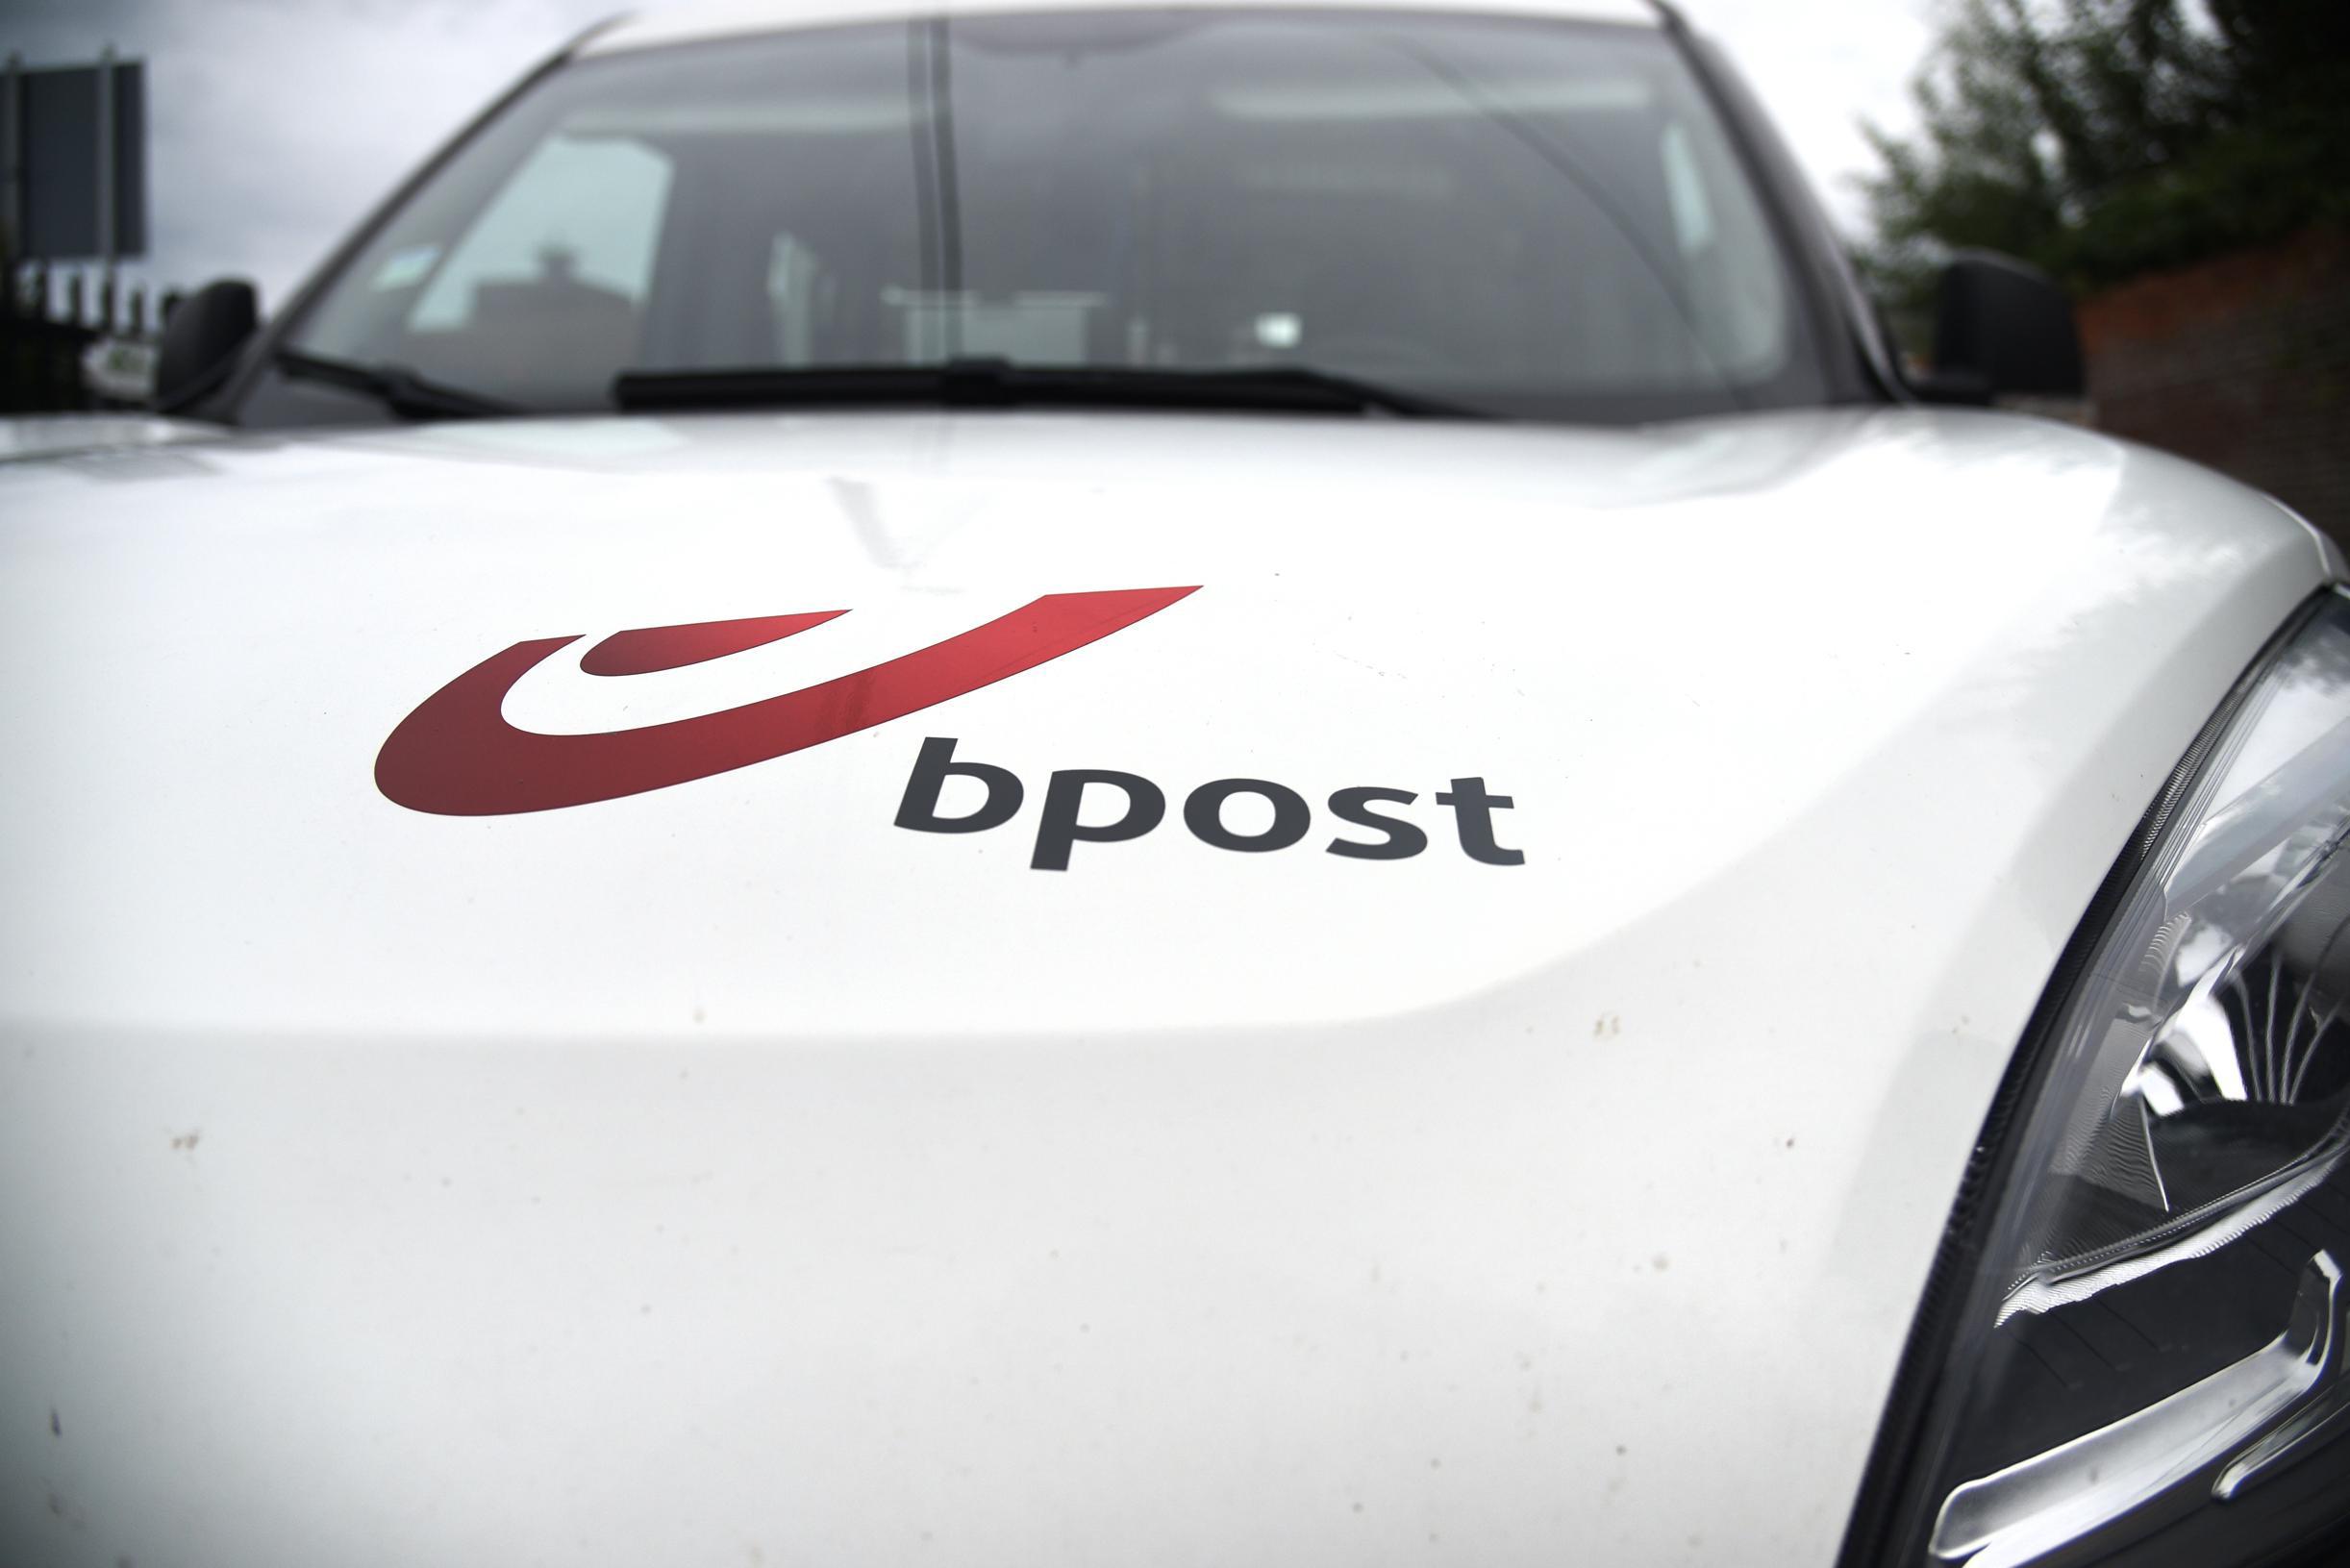 Federal government significantly increases grant for bpost